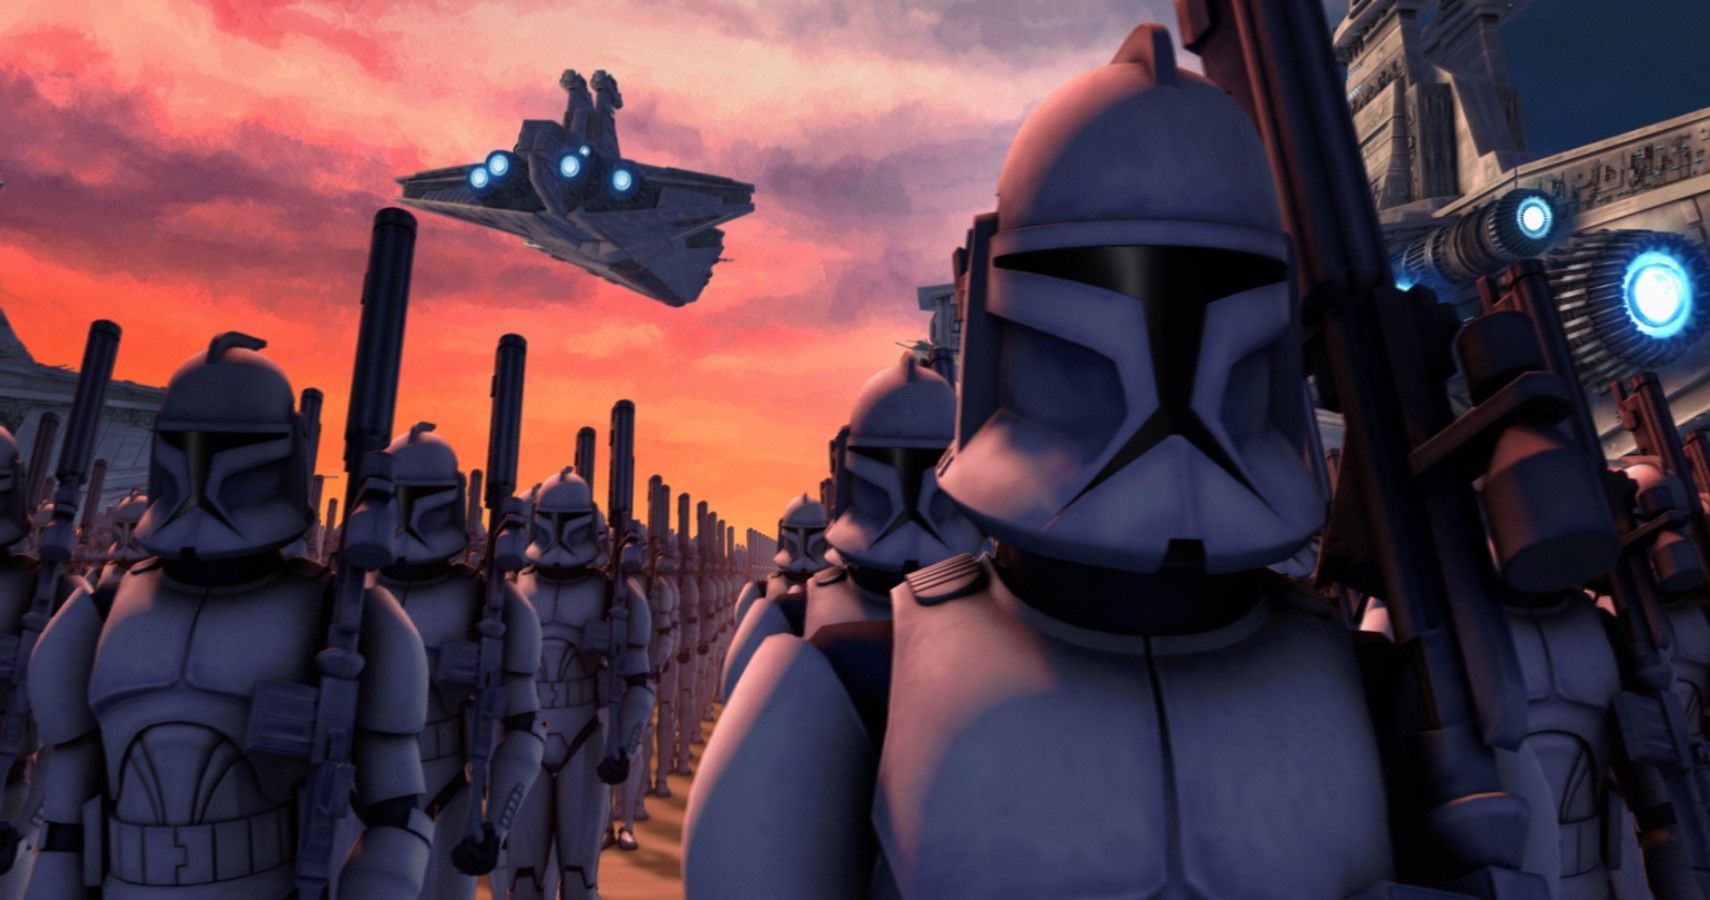 10 Best Quotes from Star Wars The Clone Wars